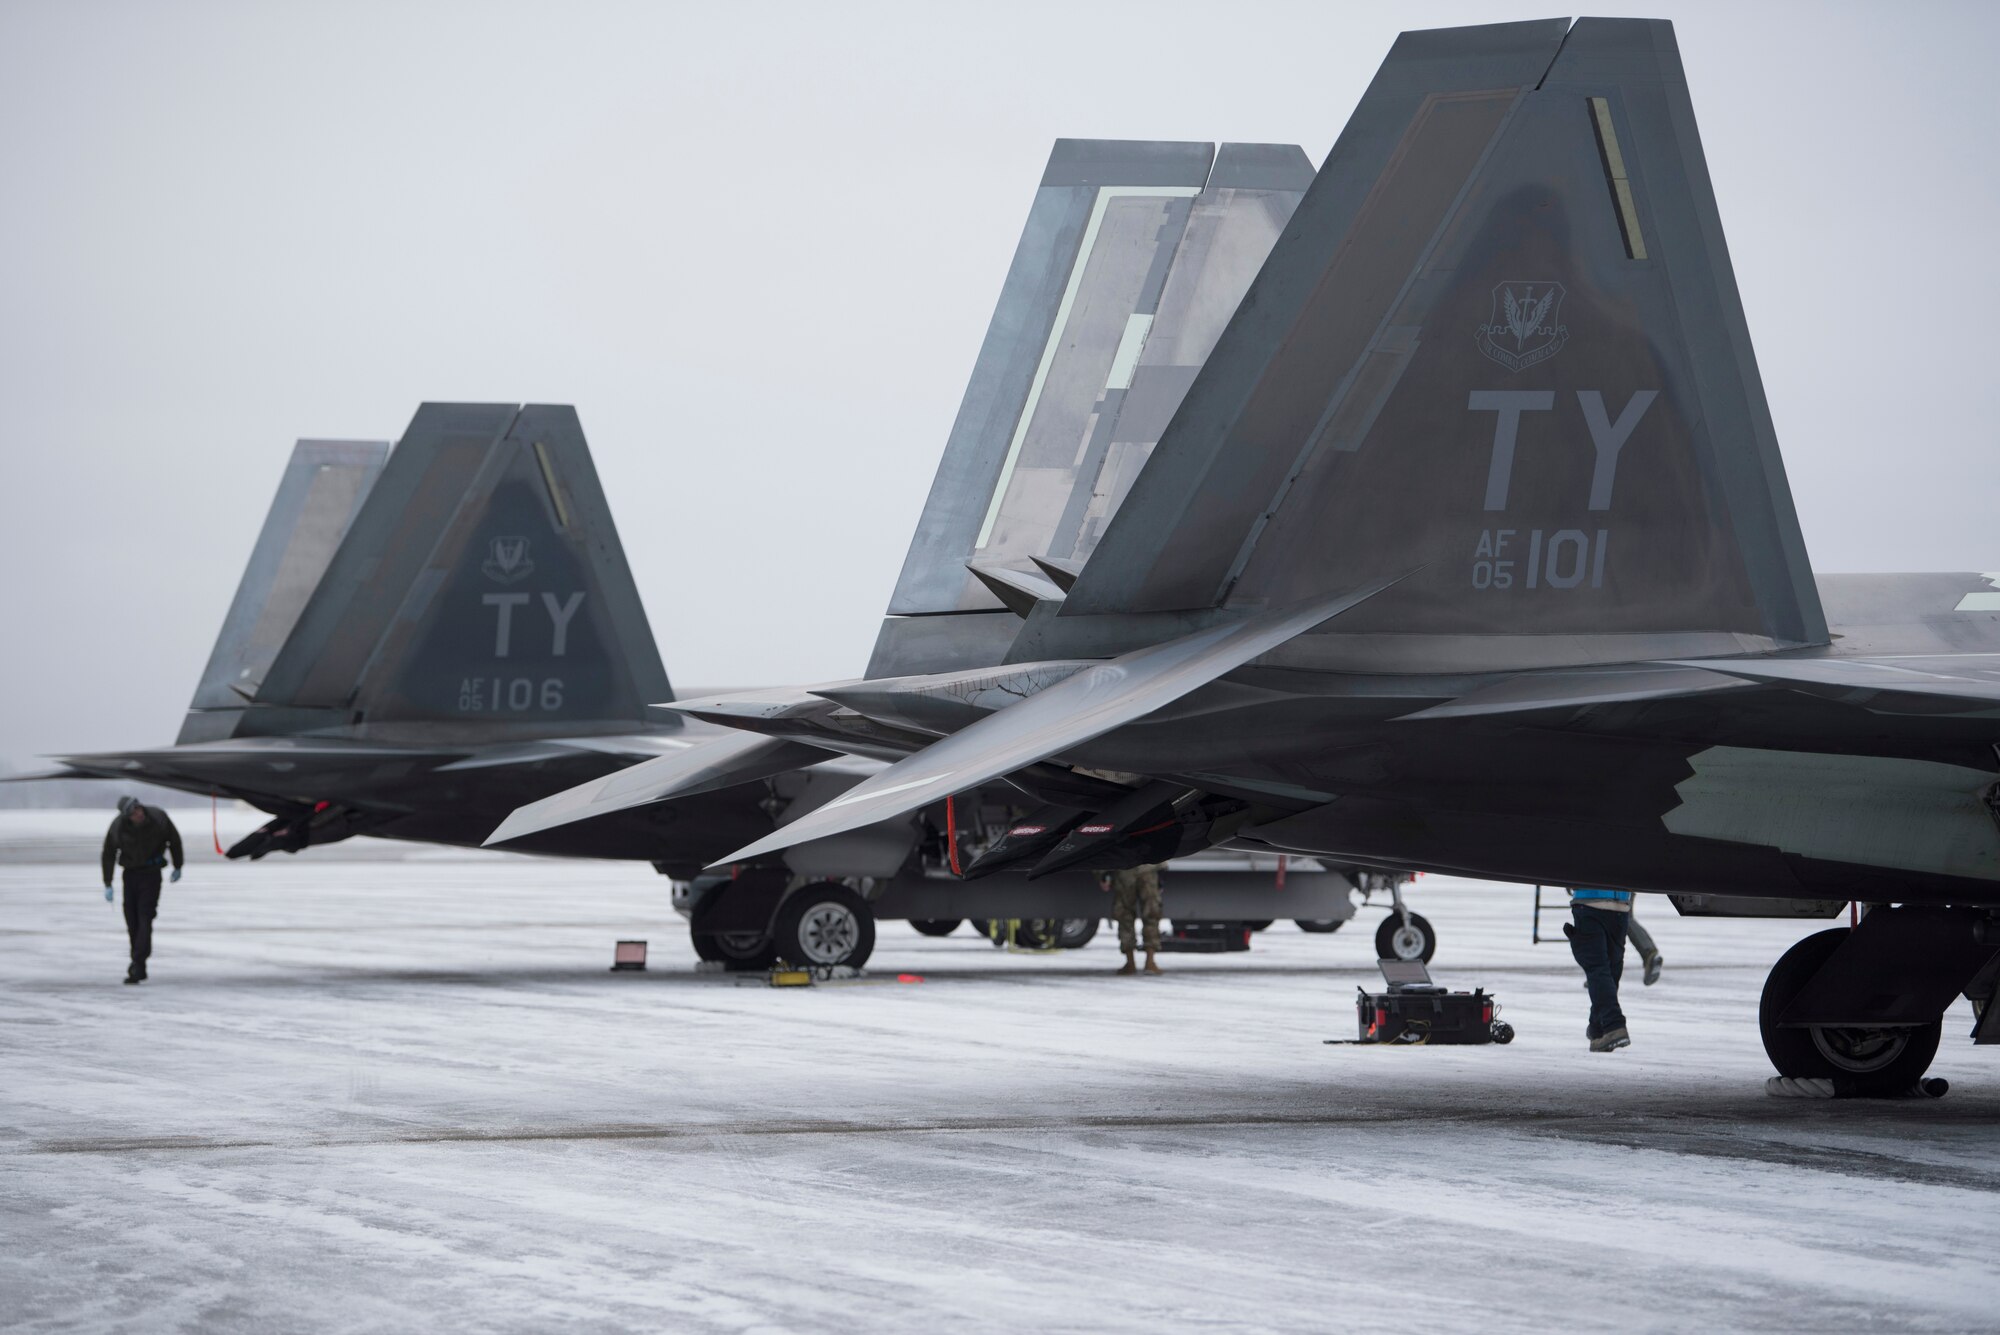 U.S. Air Force F-22 Raptors assigned to the 95th Fighter Squadron from Tyndall Air Force Base, Florida, sit on the flightline after landing at Joint Base Elmendorf-Richardson, Alaska, Dec. 17, 2018.